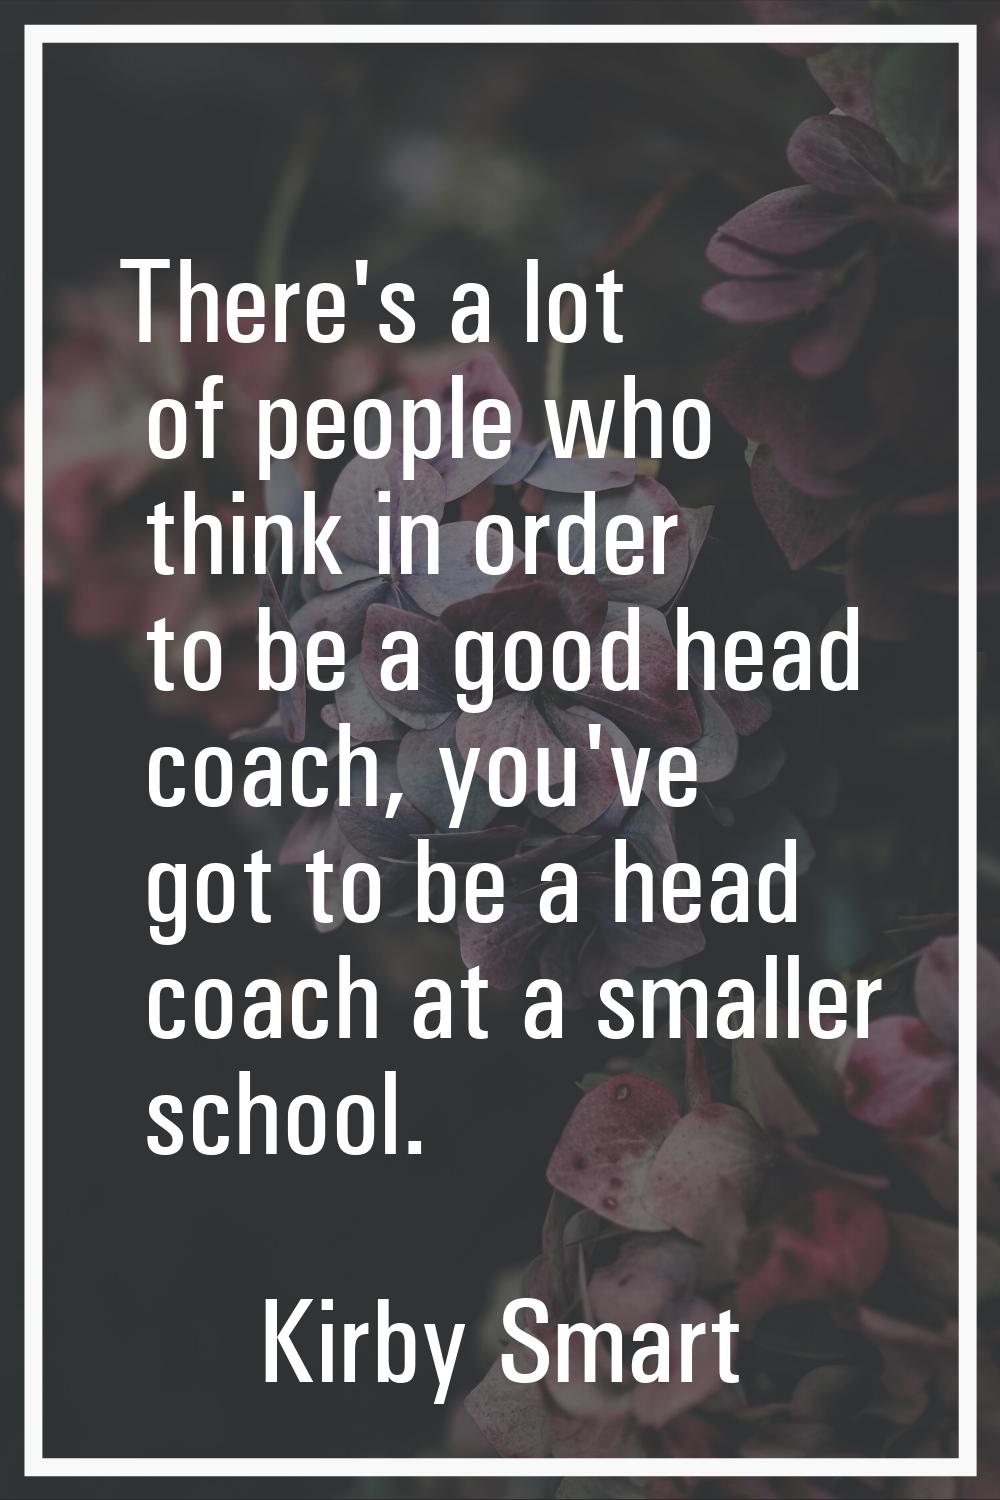 There's a lot of people who think in order to be a good head coach, you've got to be a head coach a